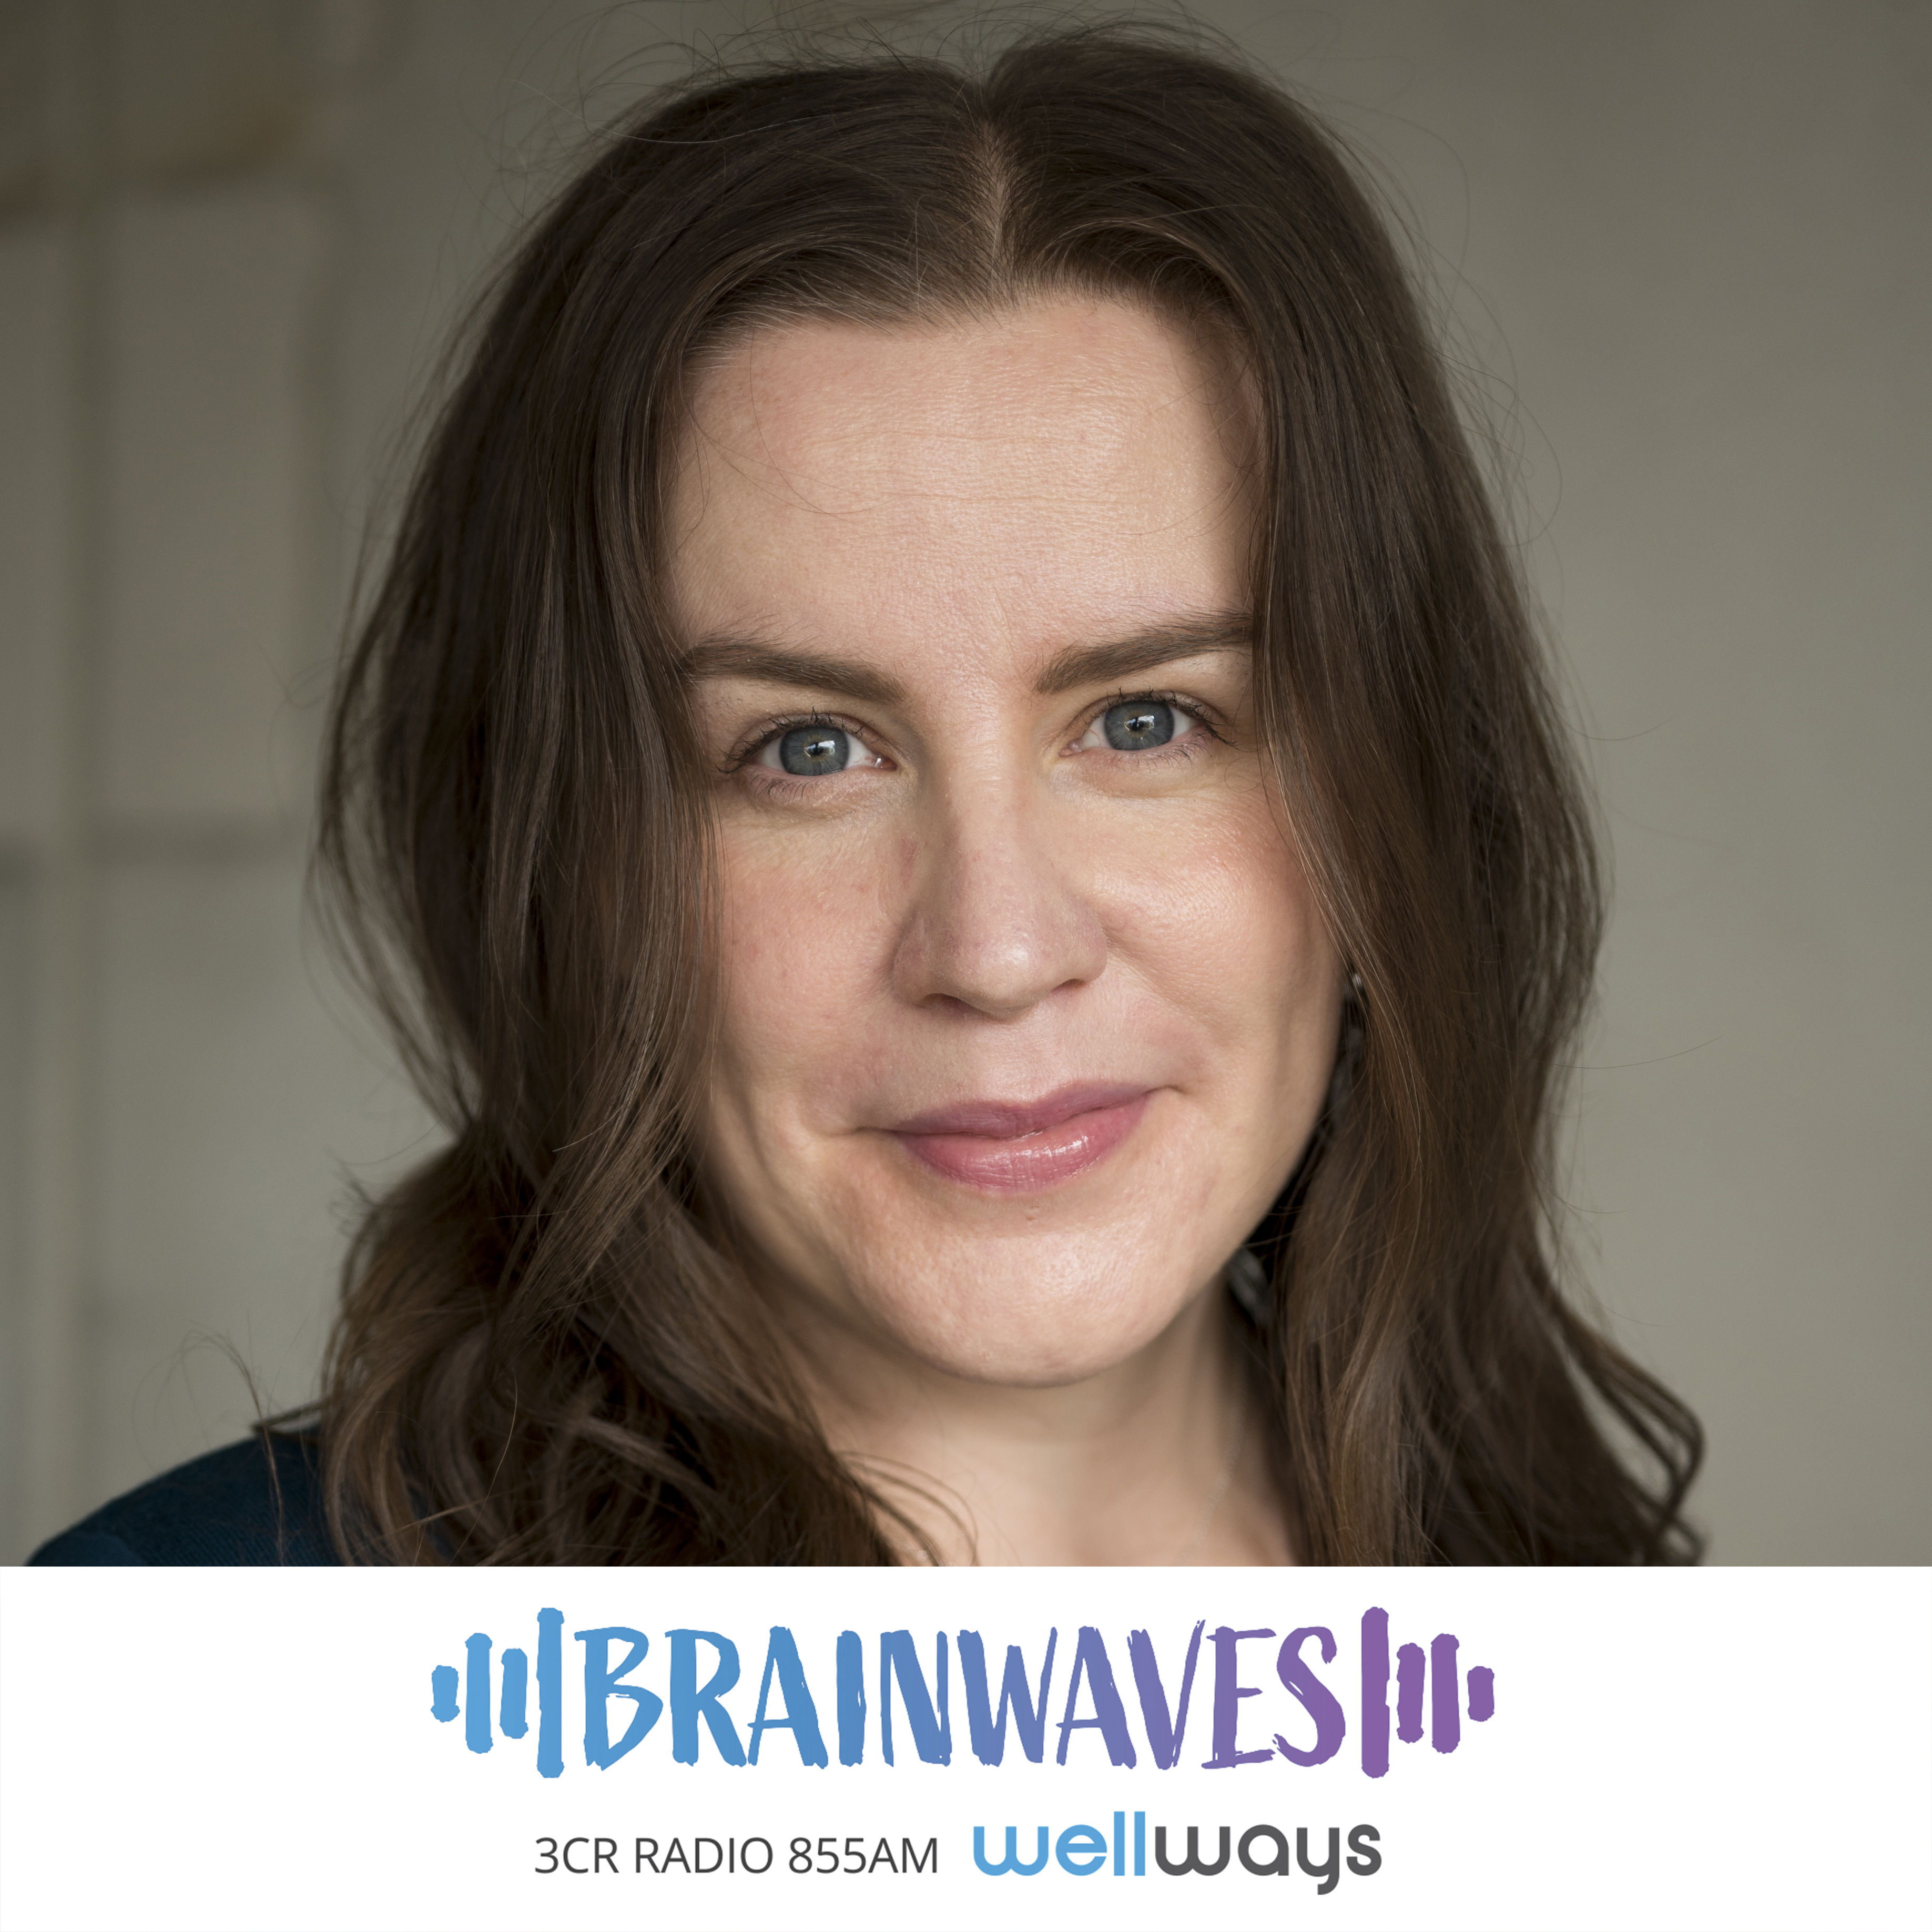 A headshot of Anna Spargo-Ryan, a lady with long brown hair smiling at the camera. Anna is on Brainwaves show on 3CR to talk about her memoir "A kind of magic" which is about her anxiety and psychosis.